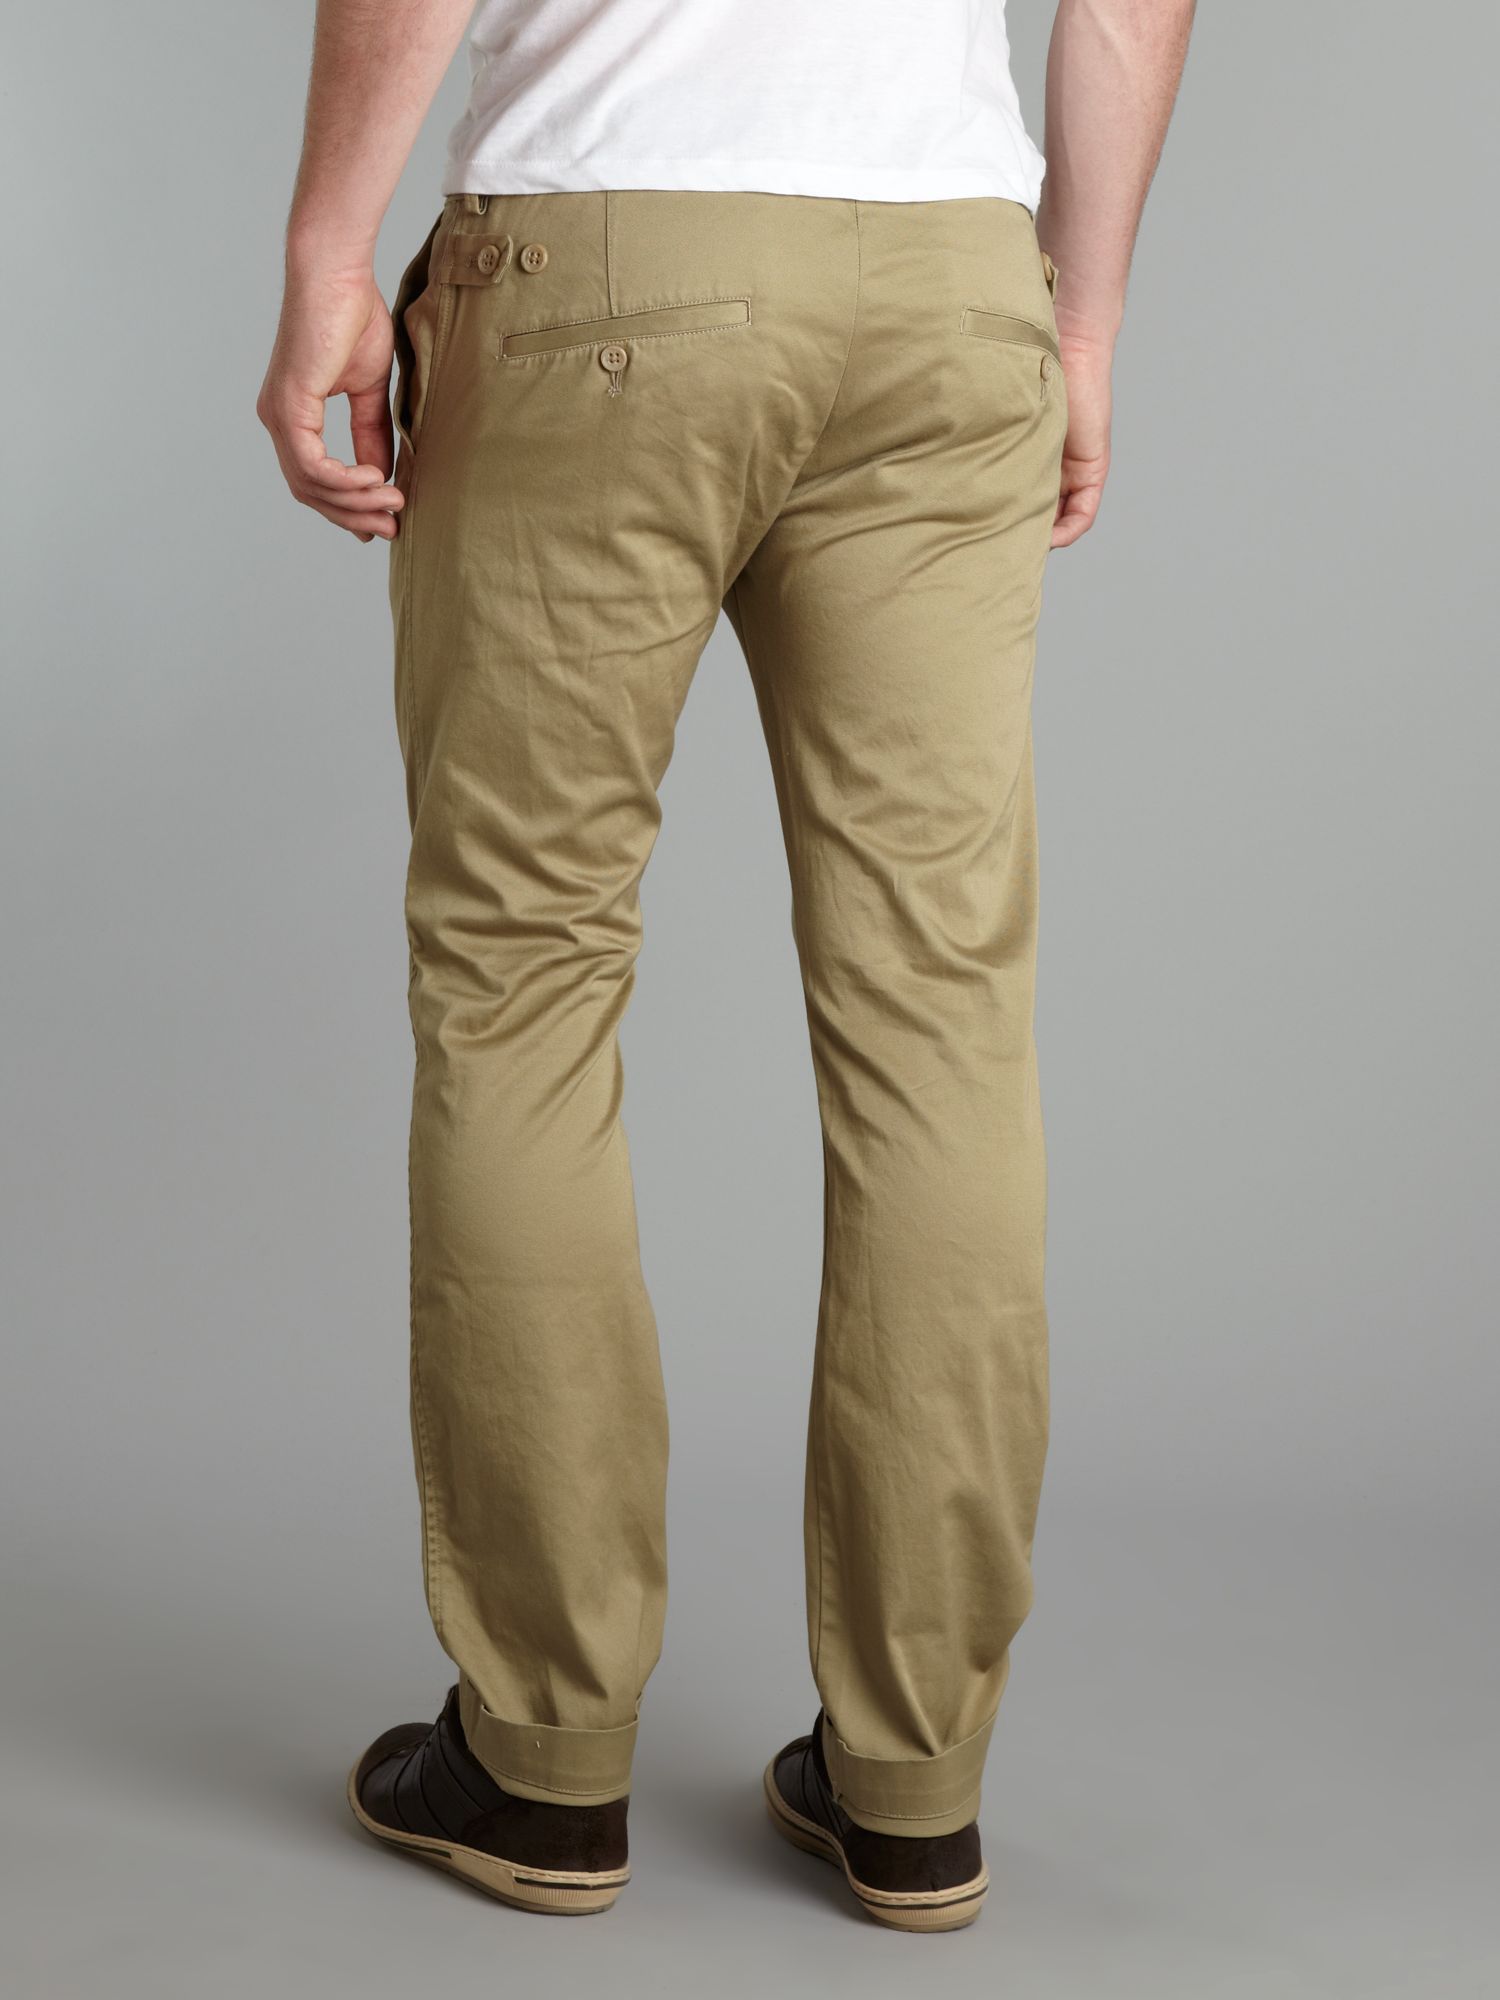 DIESEL Slim Fit Chino Trousers in Sand (Natural) for Men - Lyst